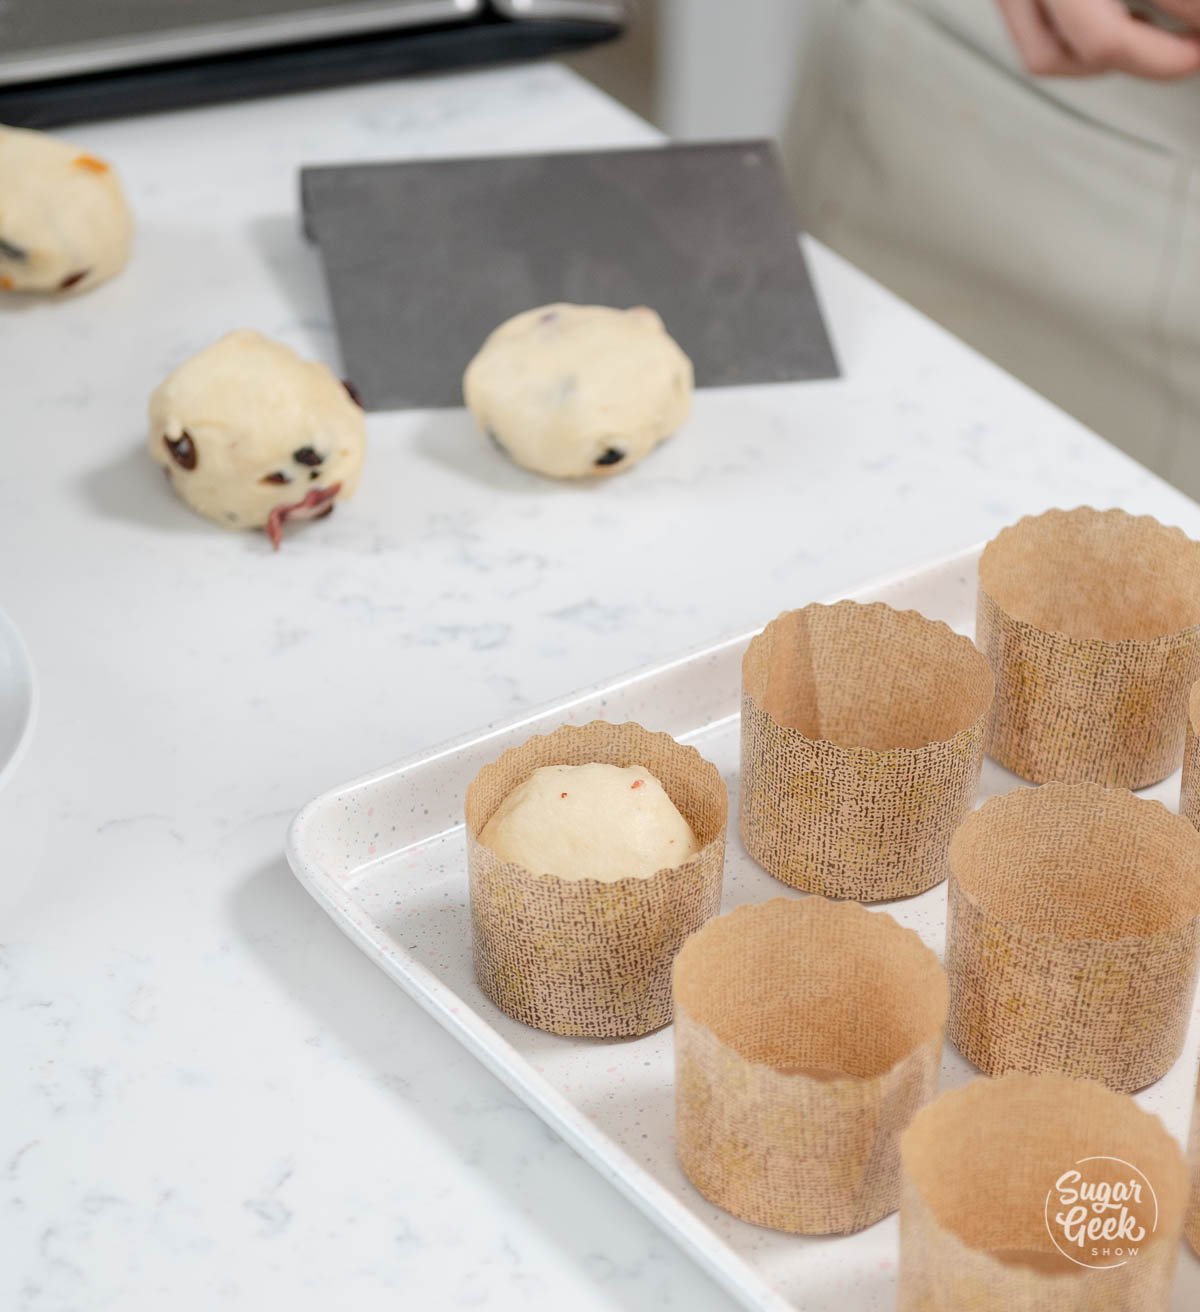 placing panettone dough balls in panettone wrappers